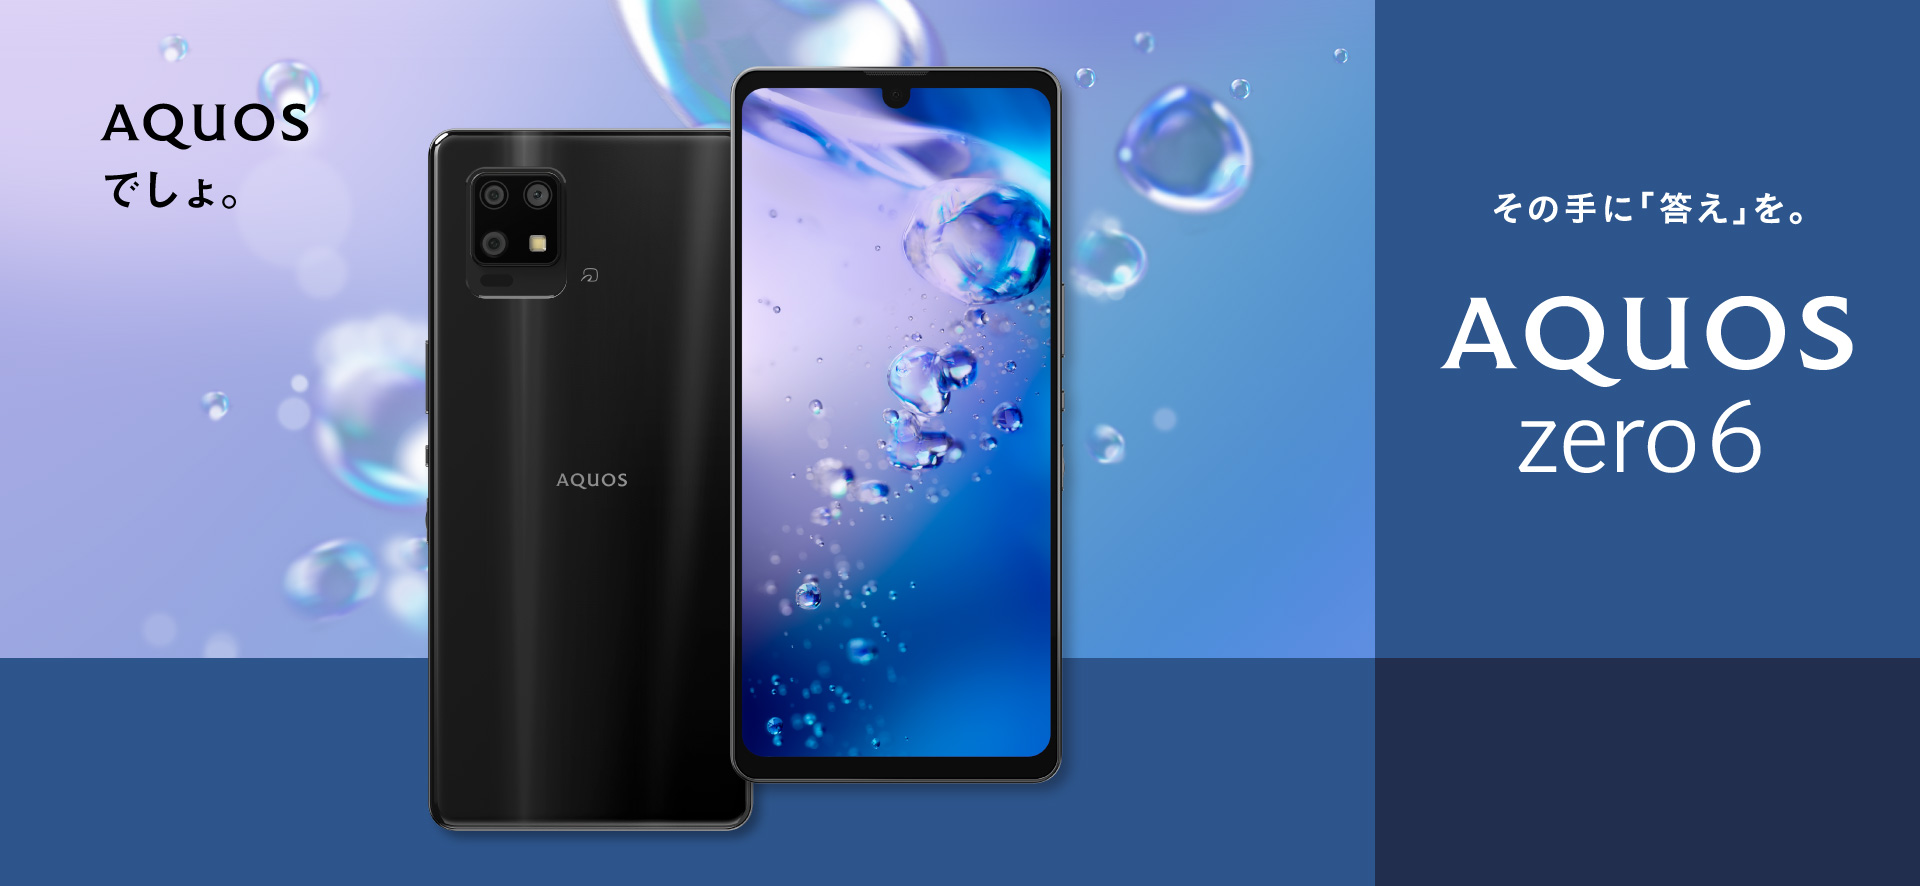 Sharp Aquos Zero 6 - 240Hz screen, Snapdragon 750G, IP68 protection and Android 11